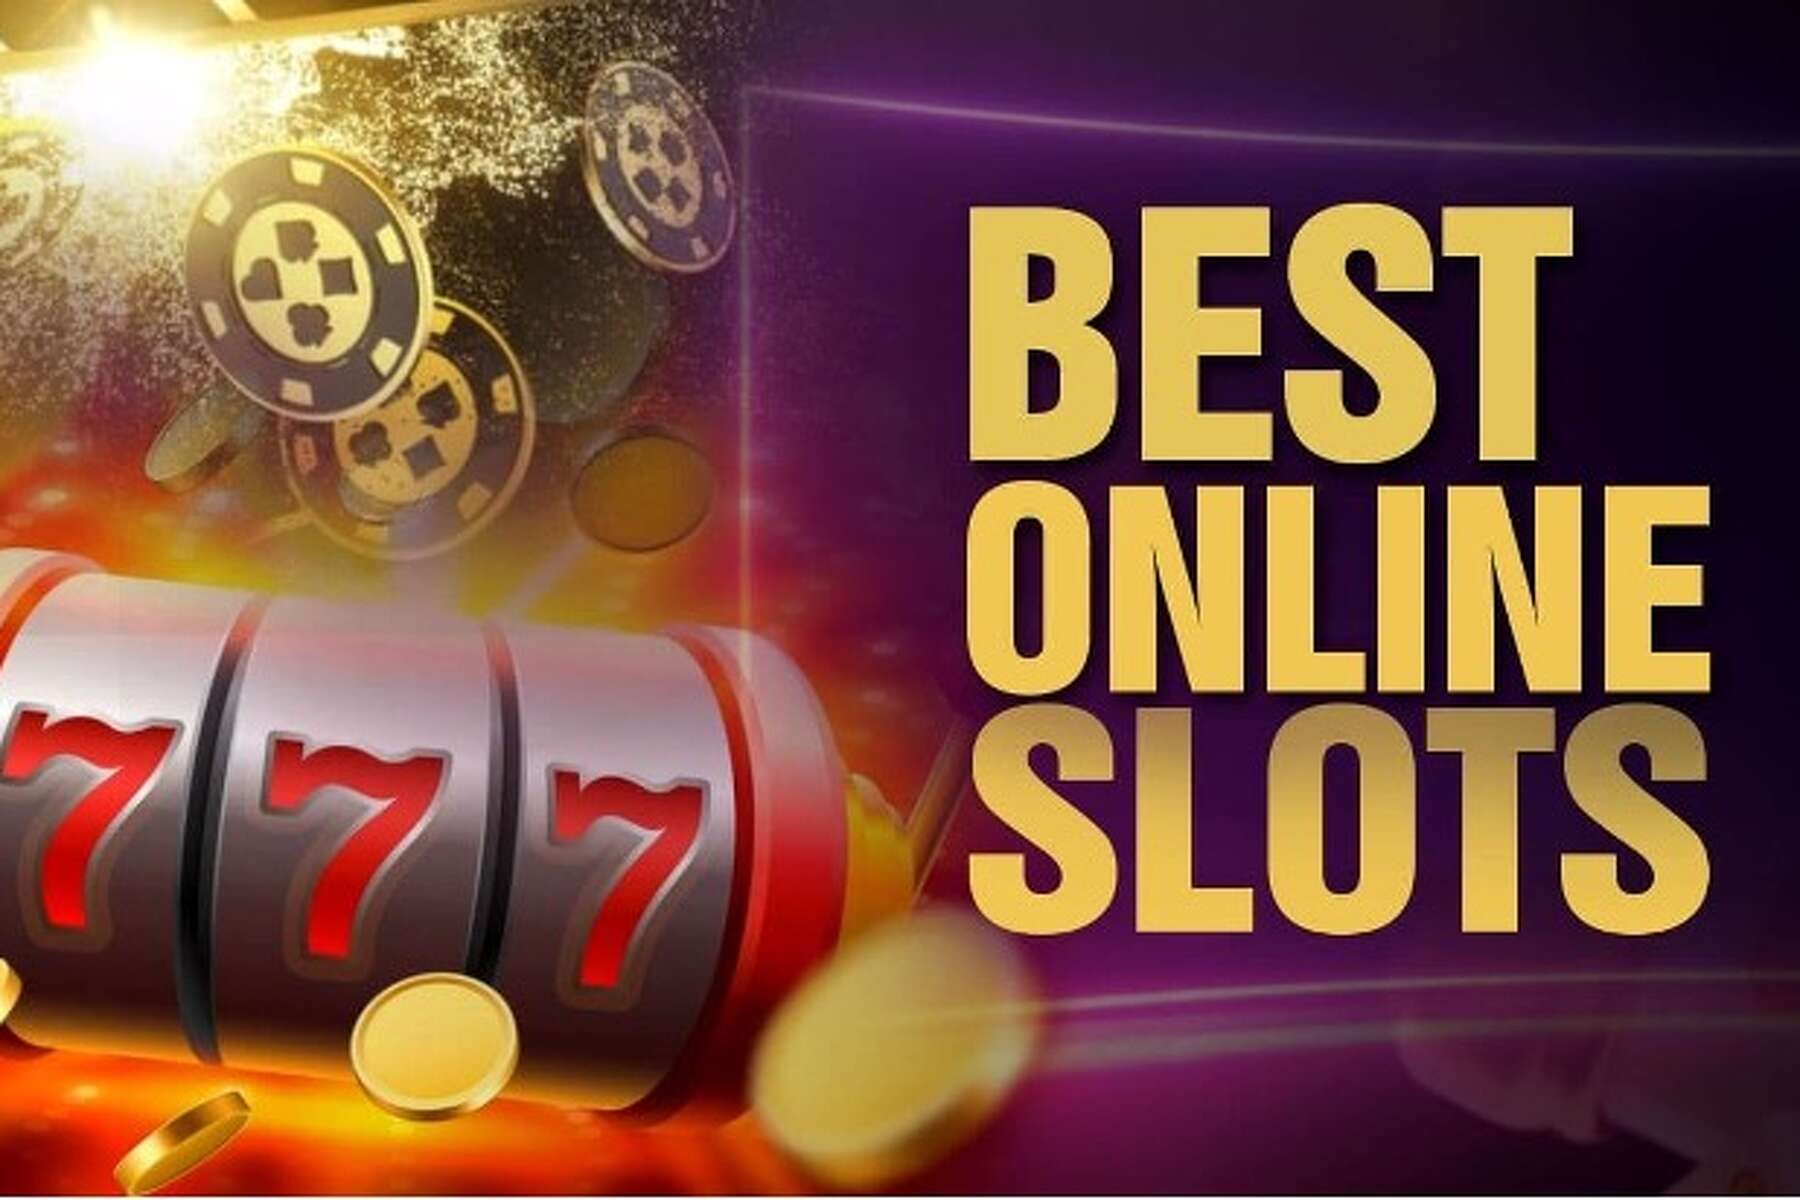 15 Best Online Slots for High Payouts and Real Money Wins